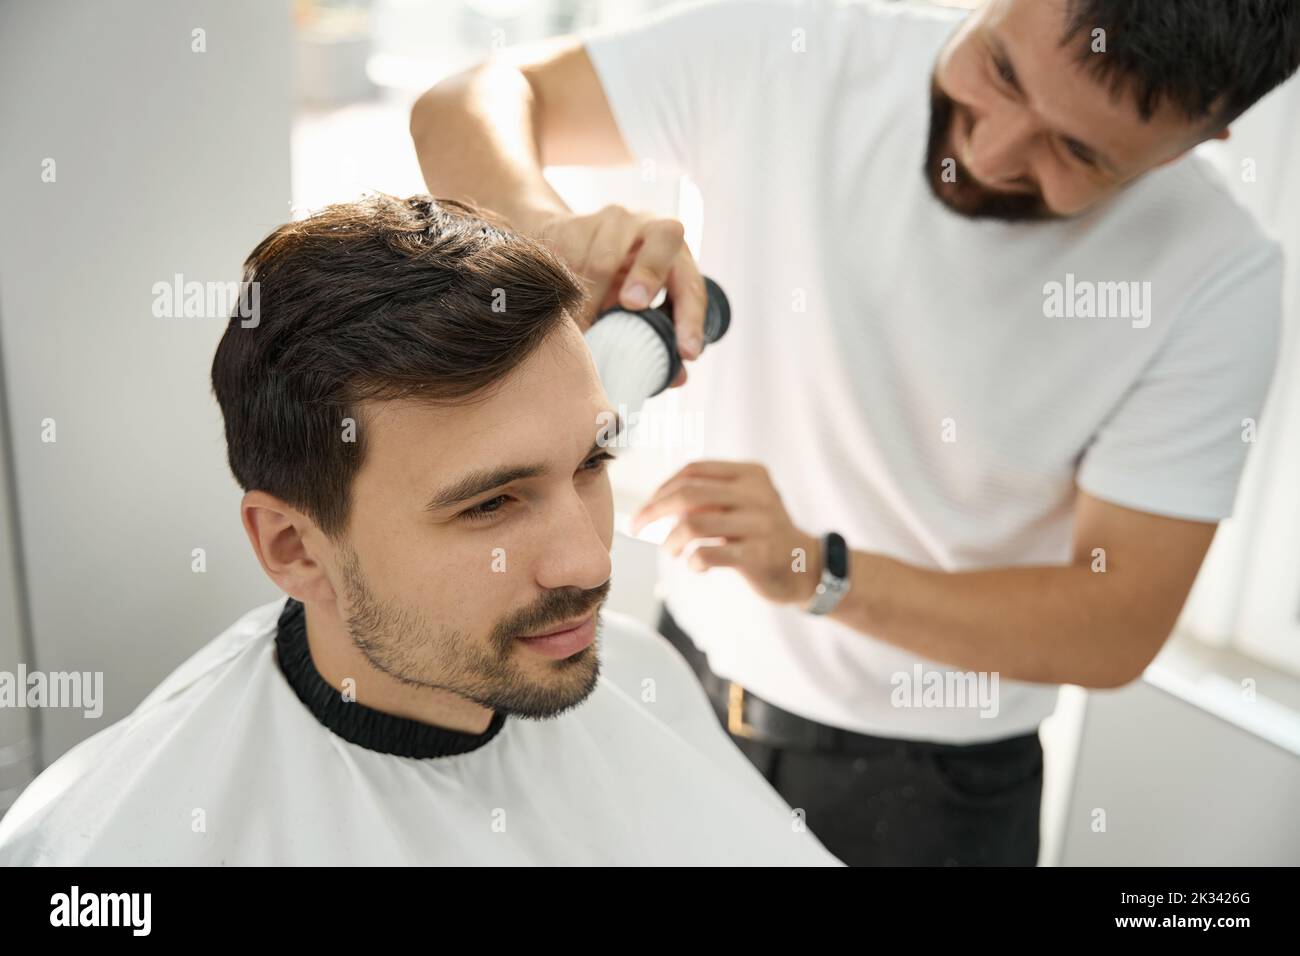 Cheerful hairstyle specialist brushing guest face after cutting hair Stock Photo